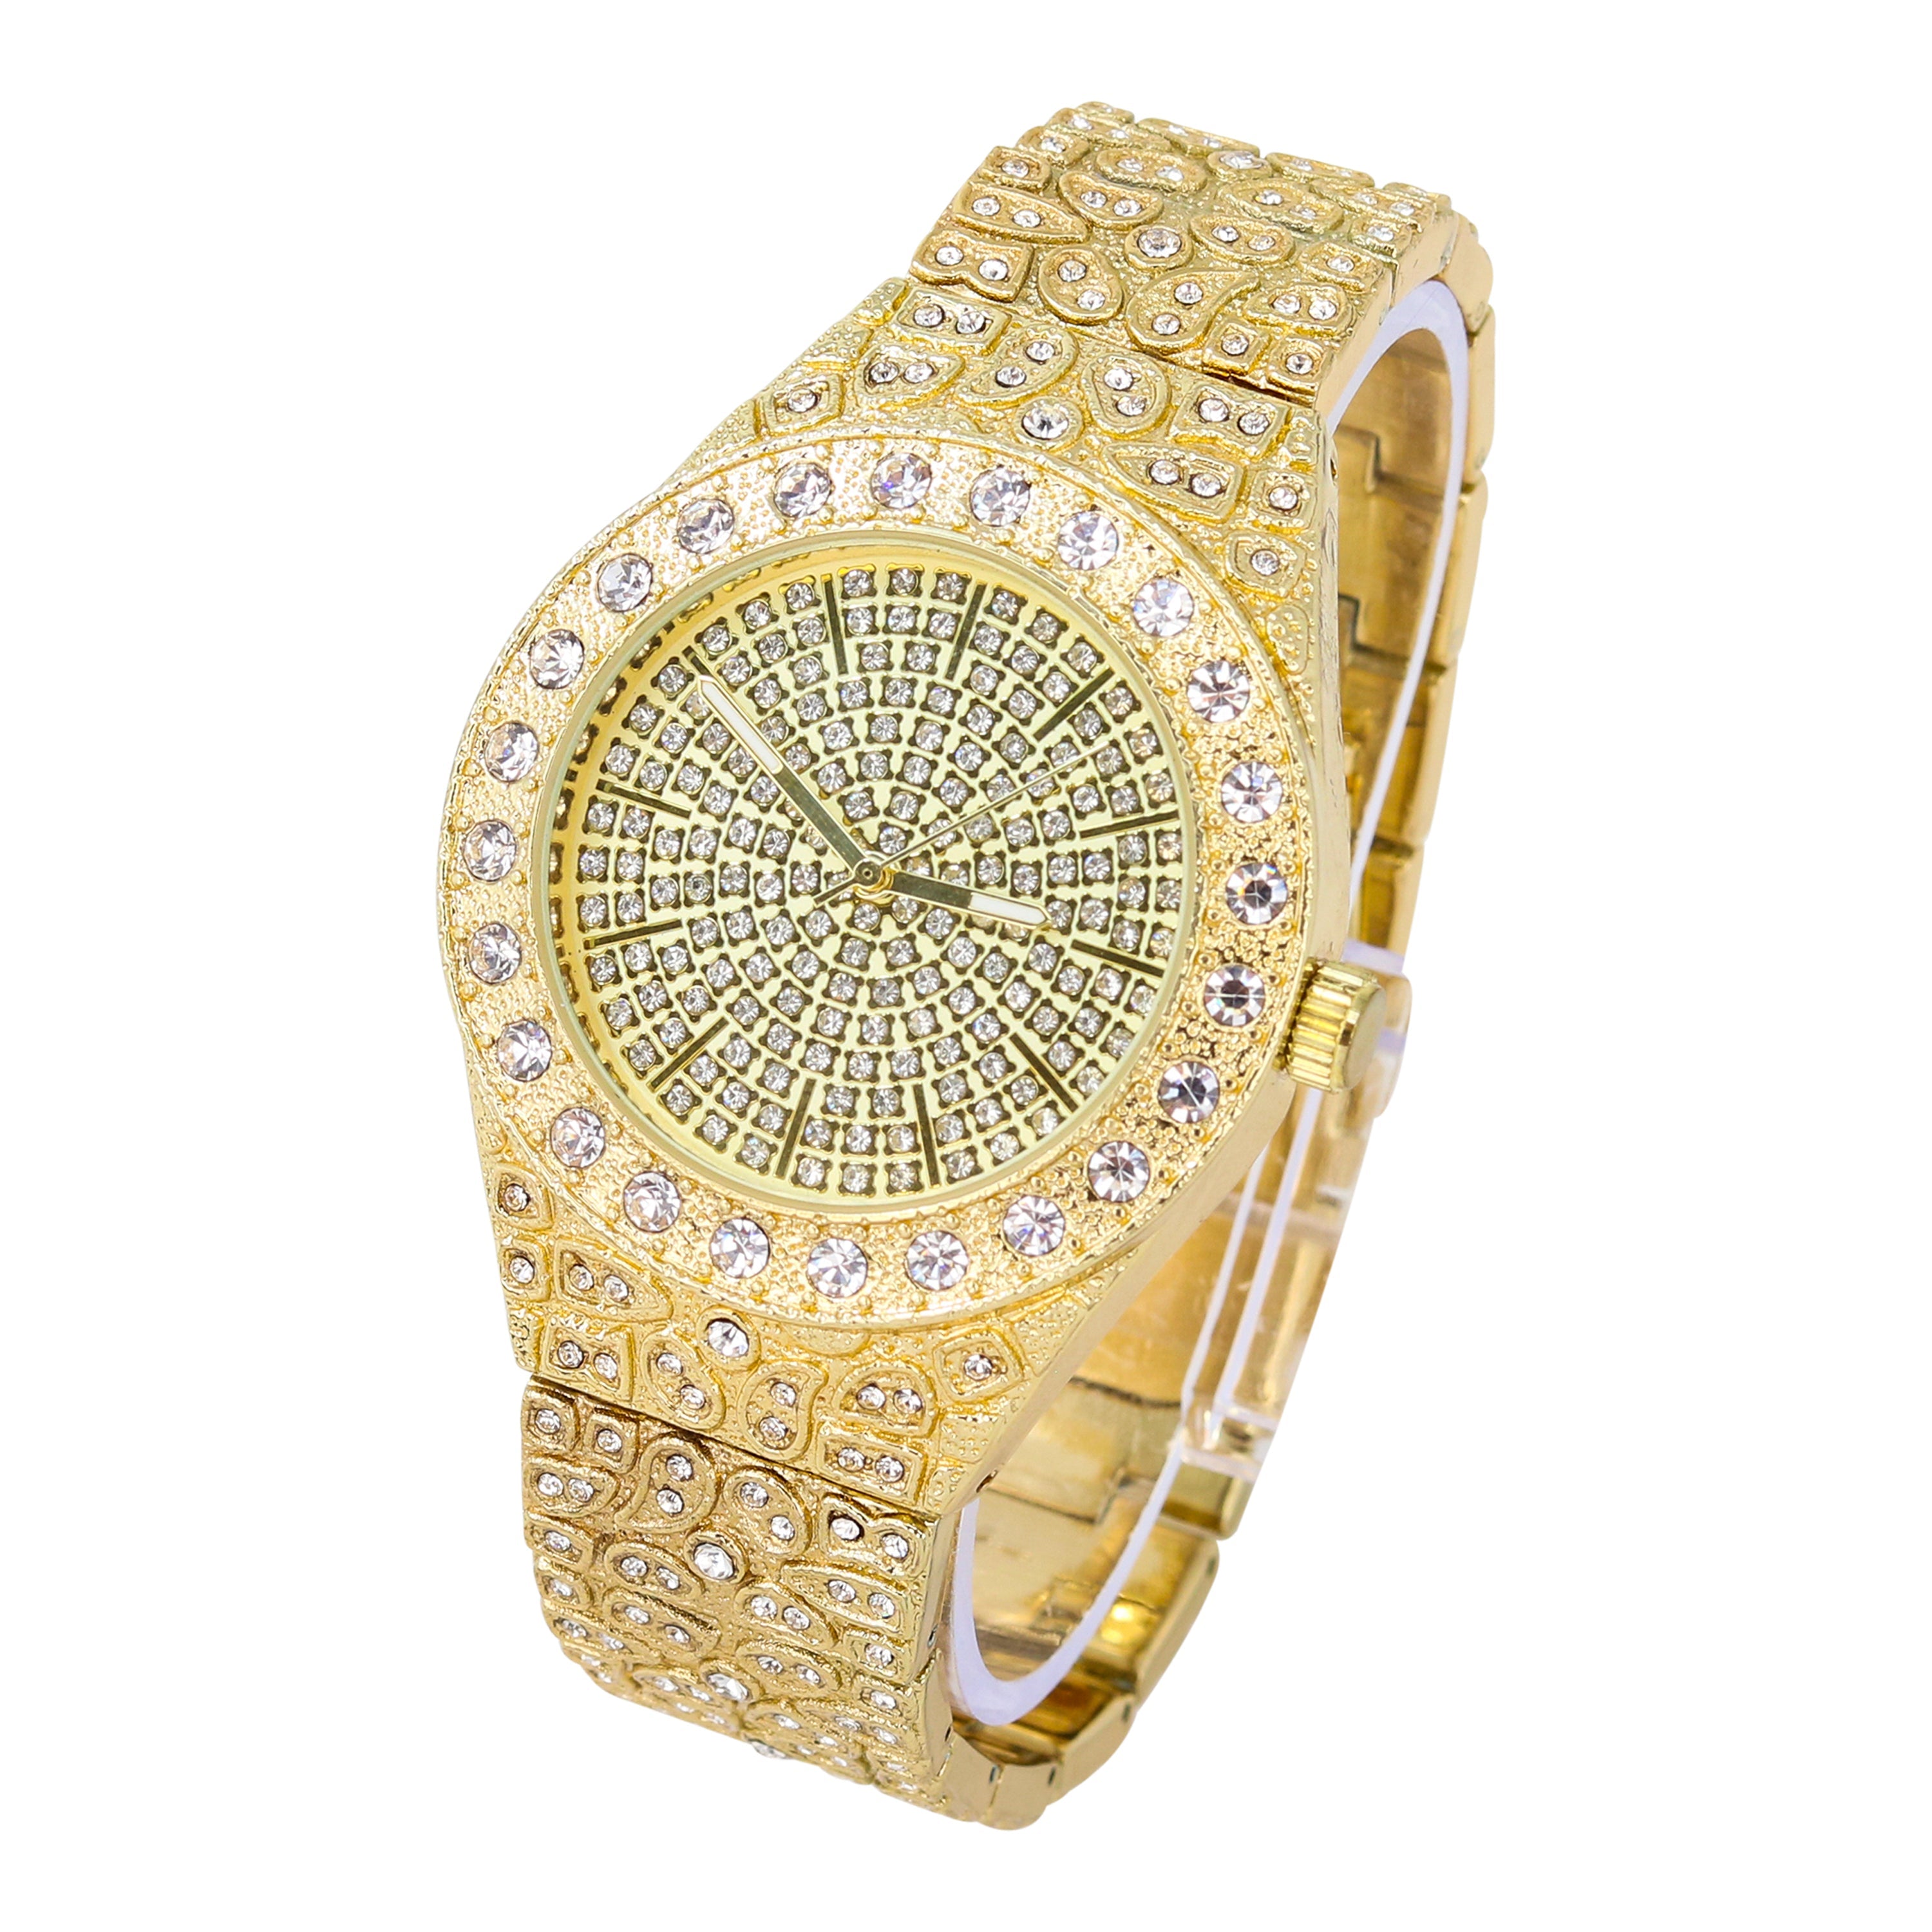 Men's Round Iced Out Watch 44mm Gold - Nugget Band